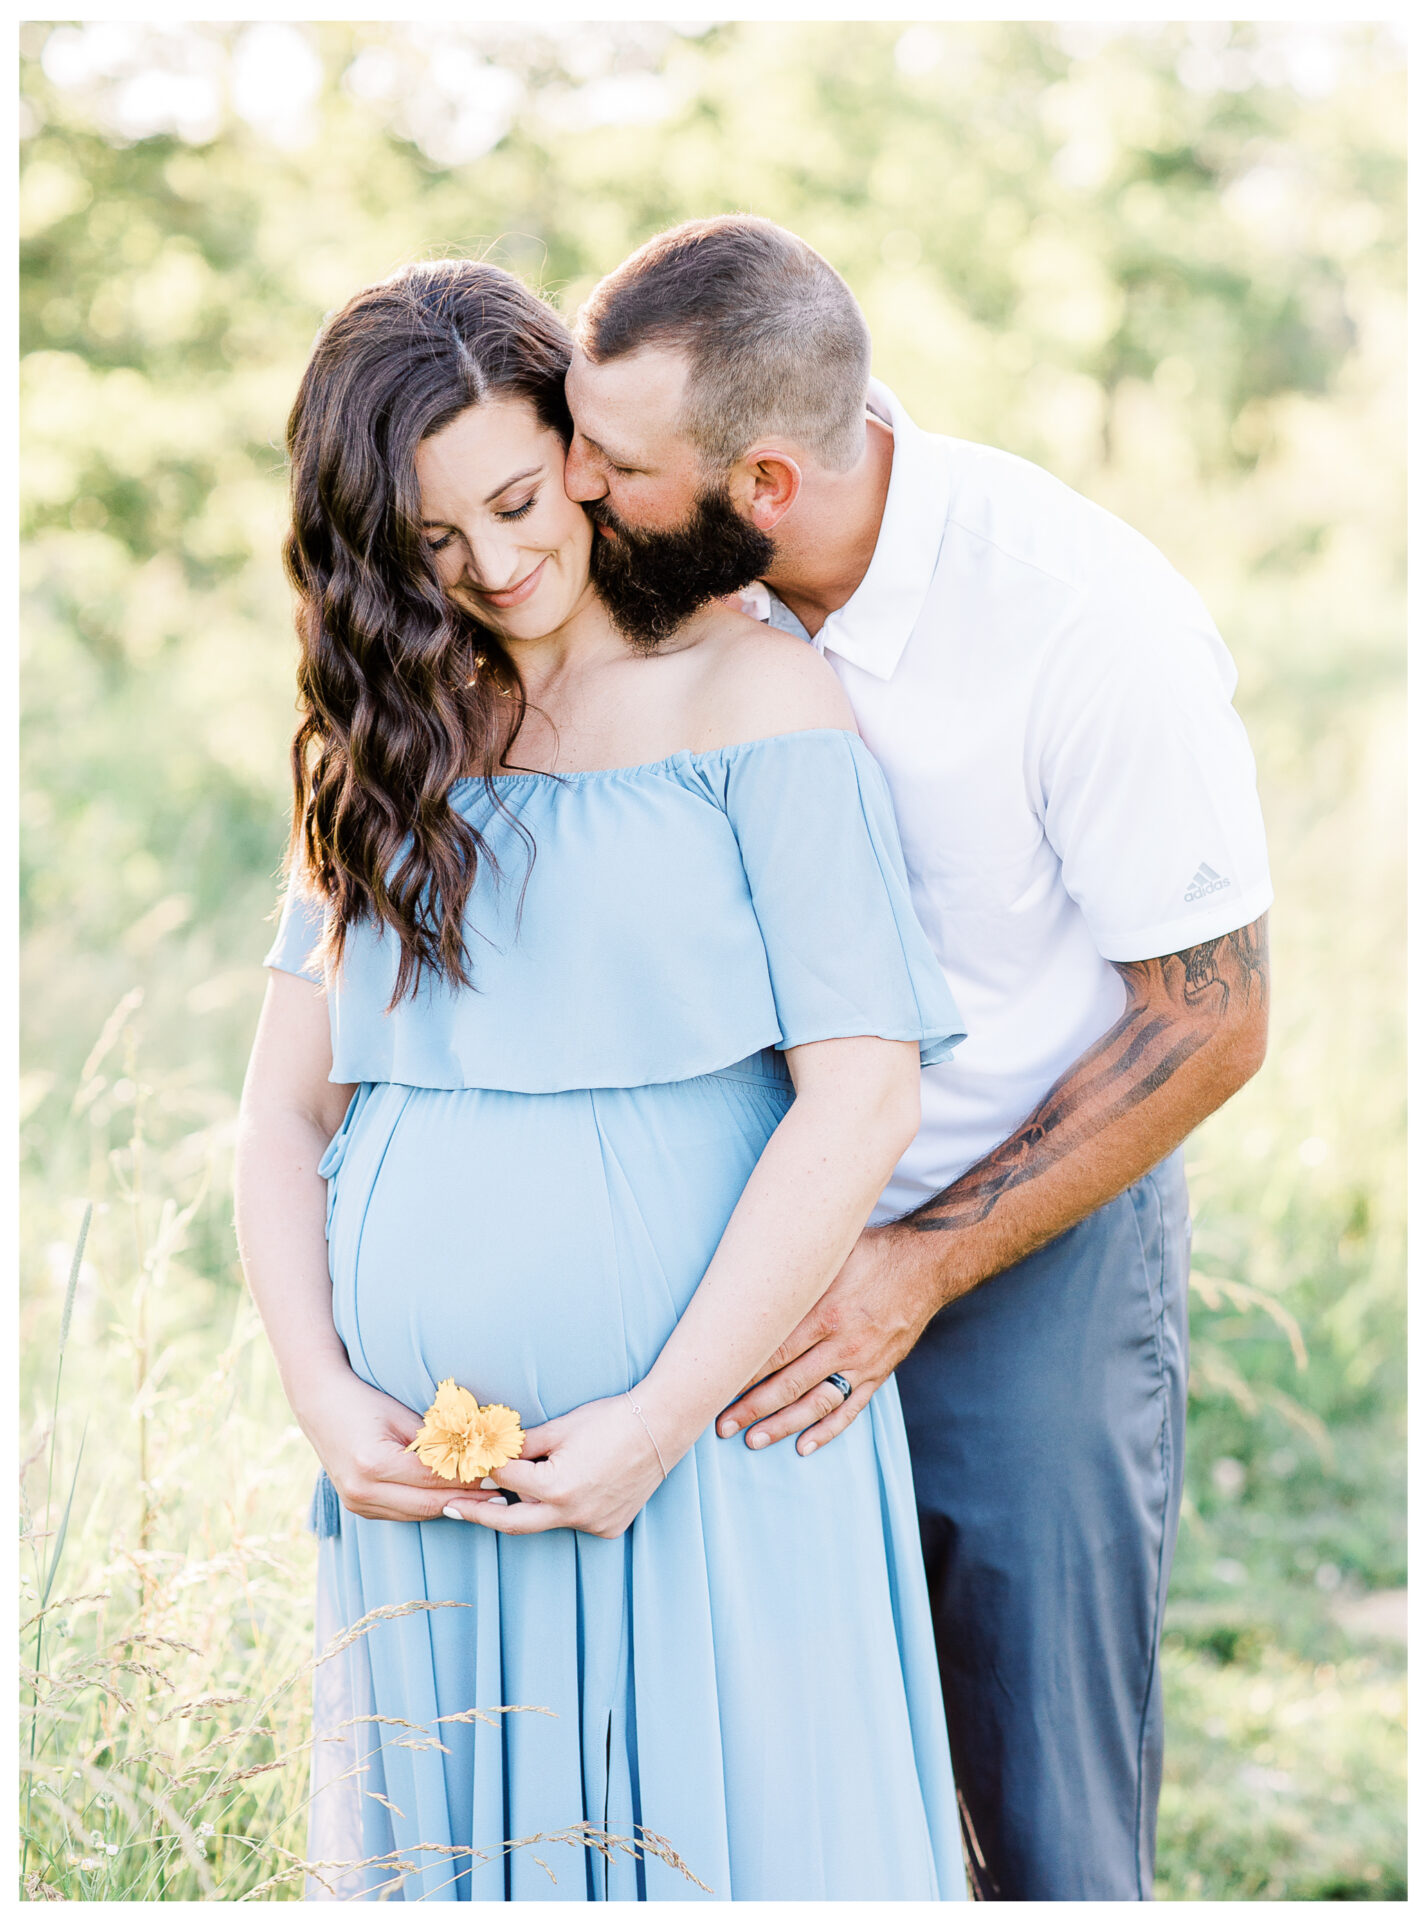 Dayton Maternity Photography | Winter Freire Photography | Dayton, Ohio Photographer | Organic Maternity Spring Session Centerville, OH | Timeless Organic Maternity Portraits